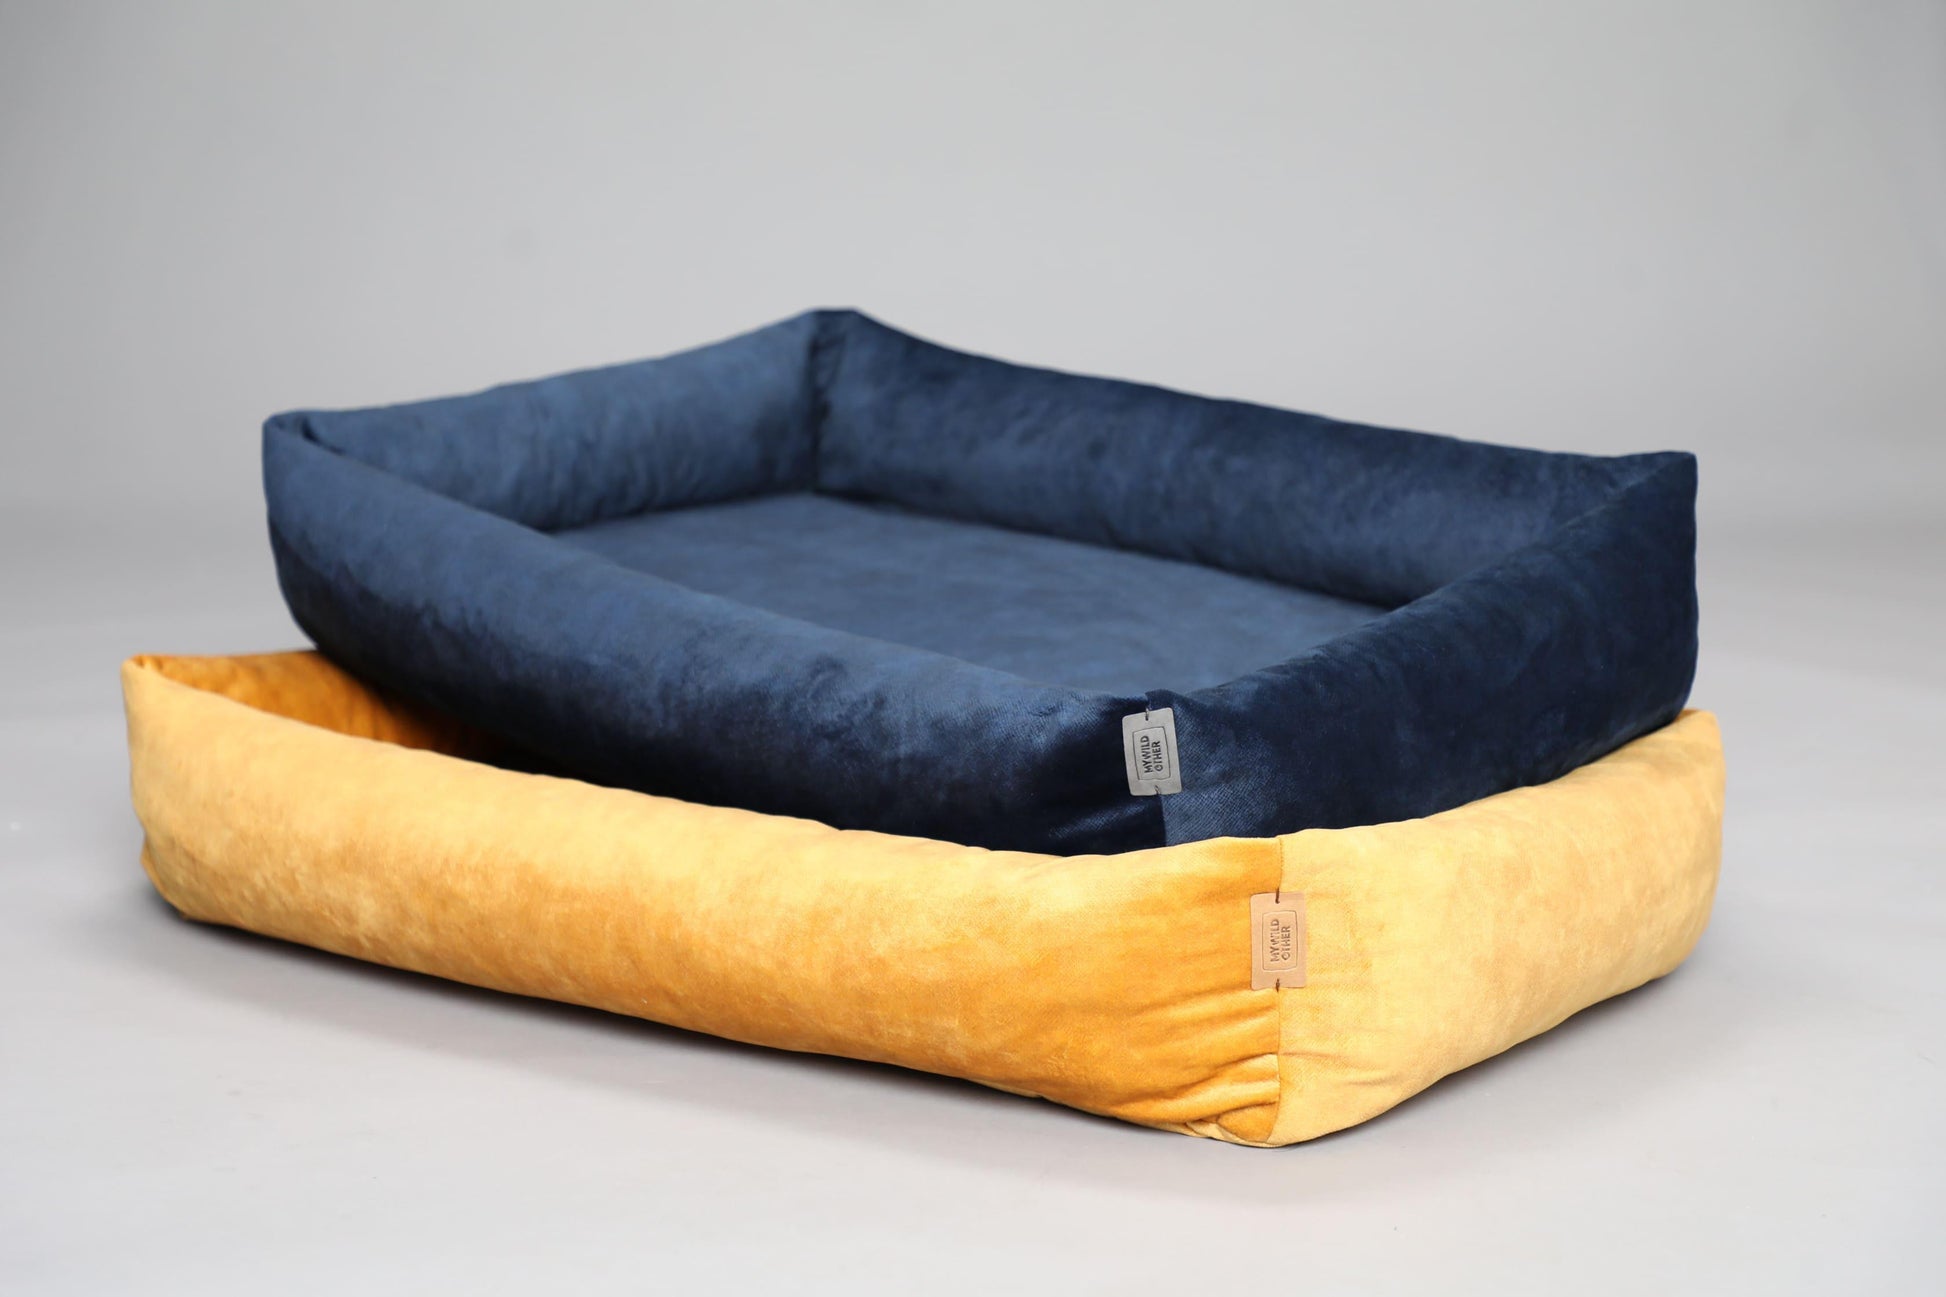 Premium dog bed with sides | 2-sided | AMBER YELLOW - premium dog goods handmade in Europe by My Wild Other